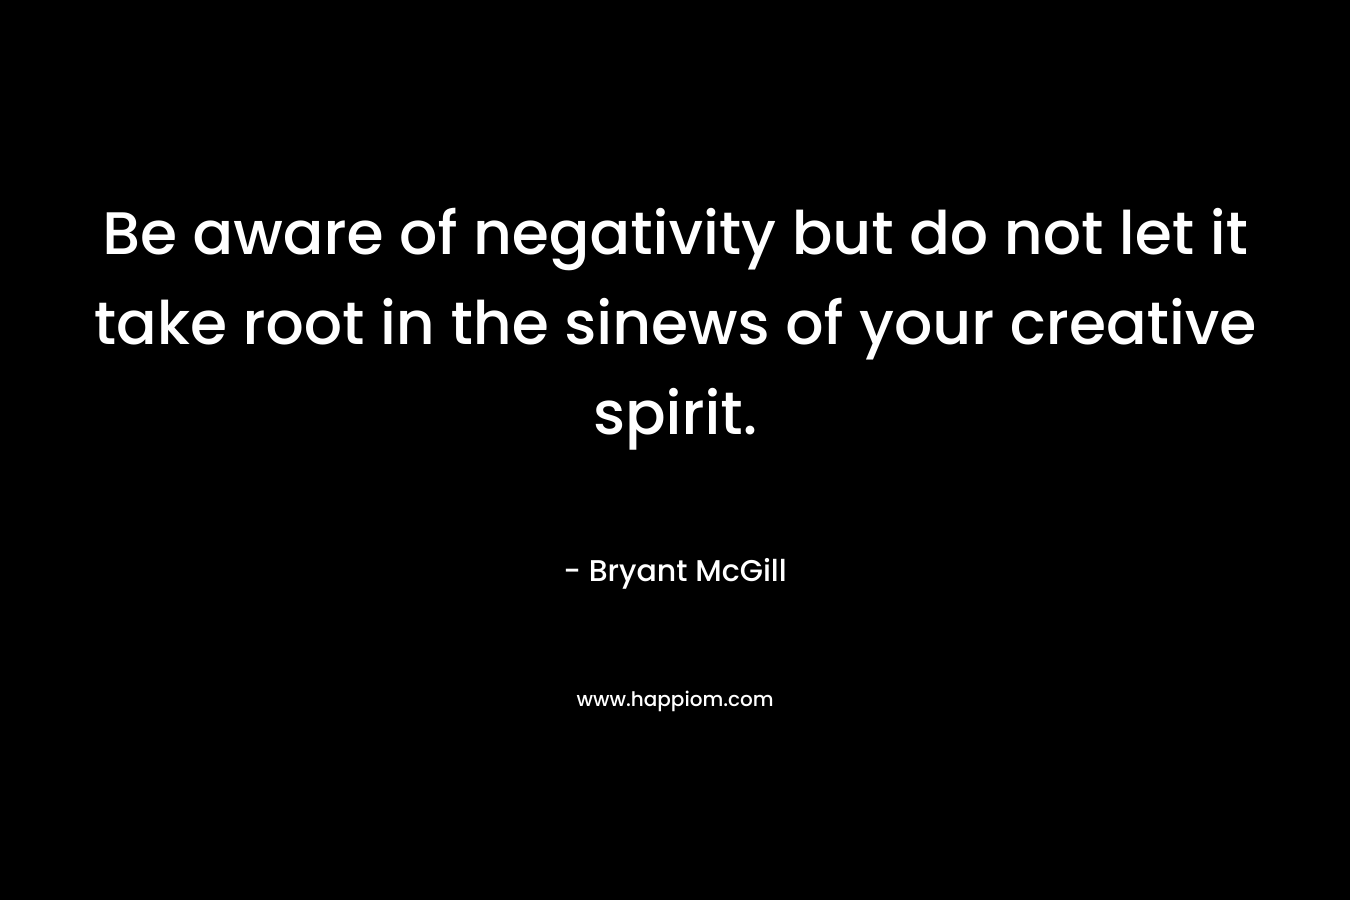 Be aware of negativity but do not let it take root in the sinews of your creative spirit.